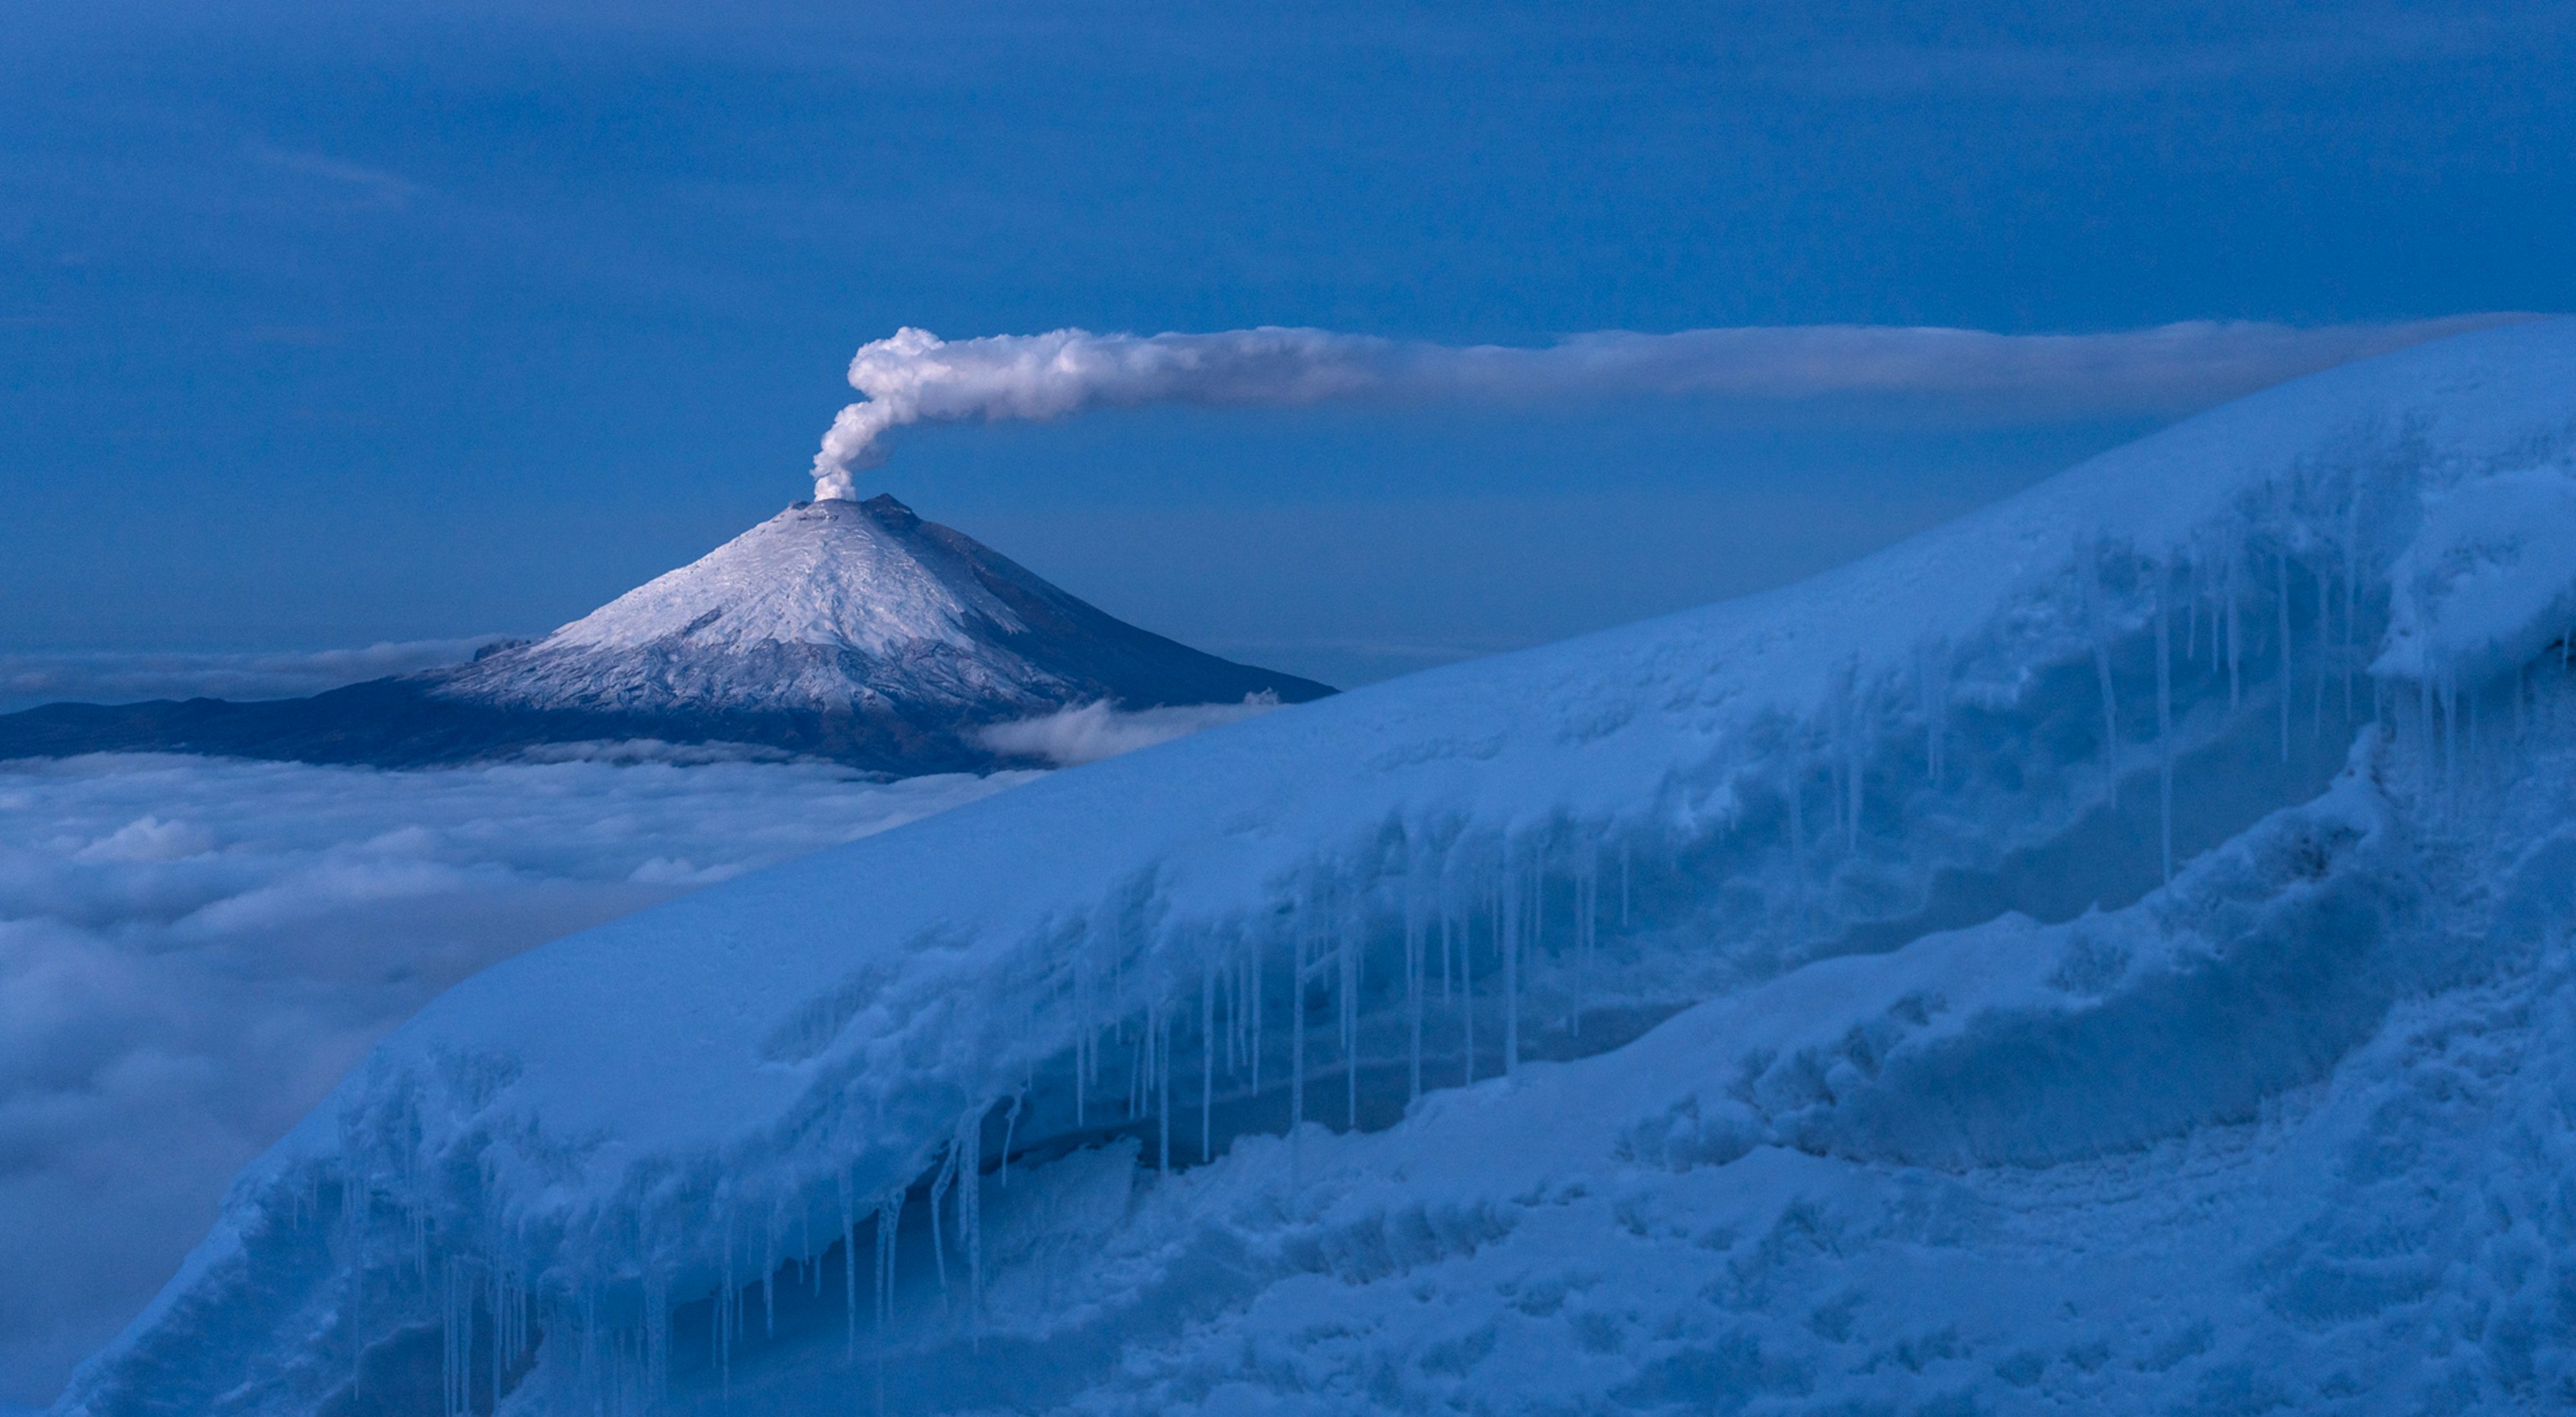 Cotopaxi volcano spews a long column of steam from a distance over a snowy landscape